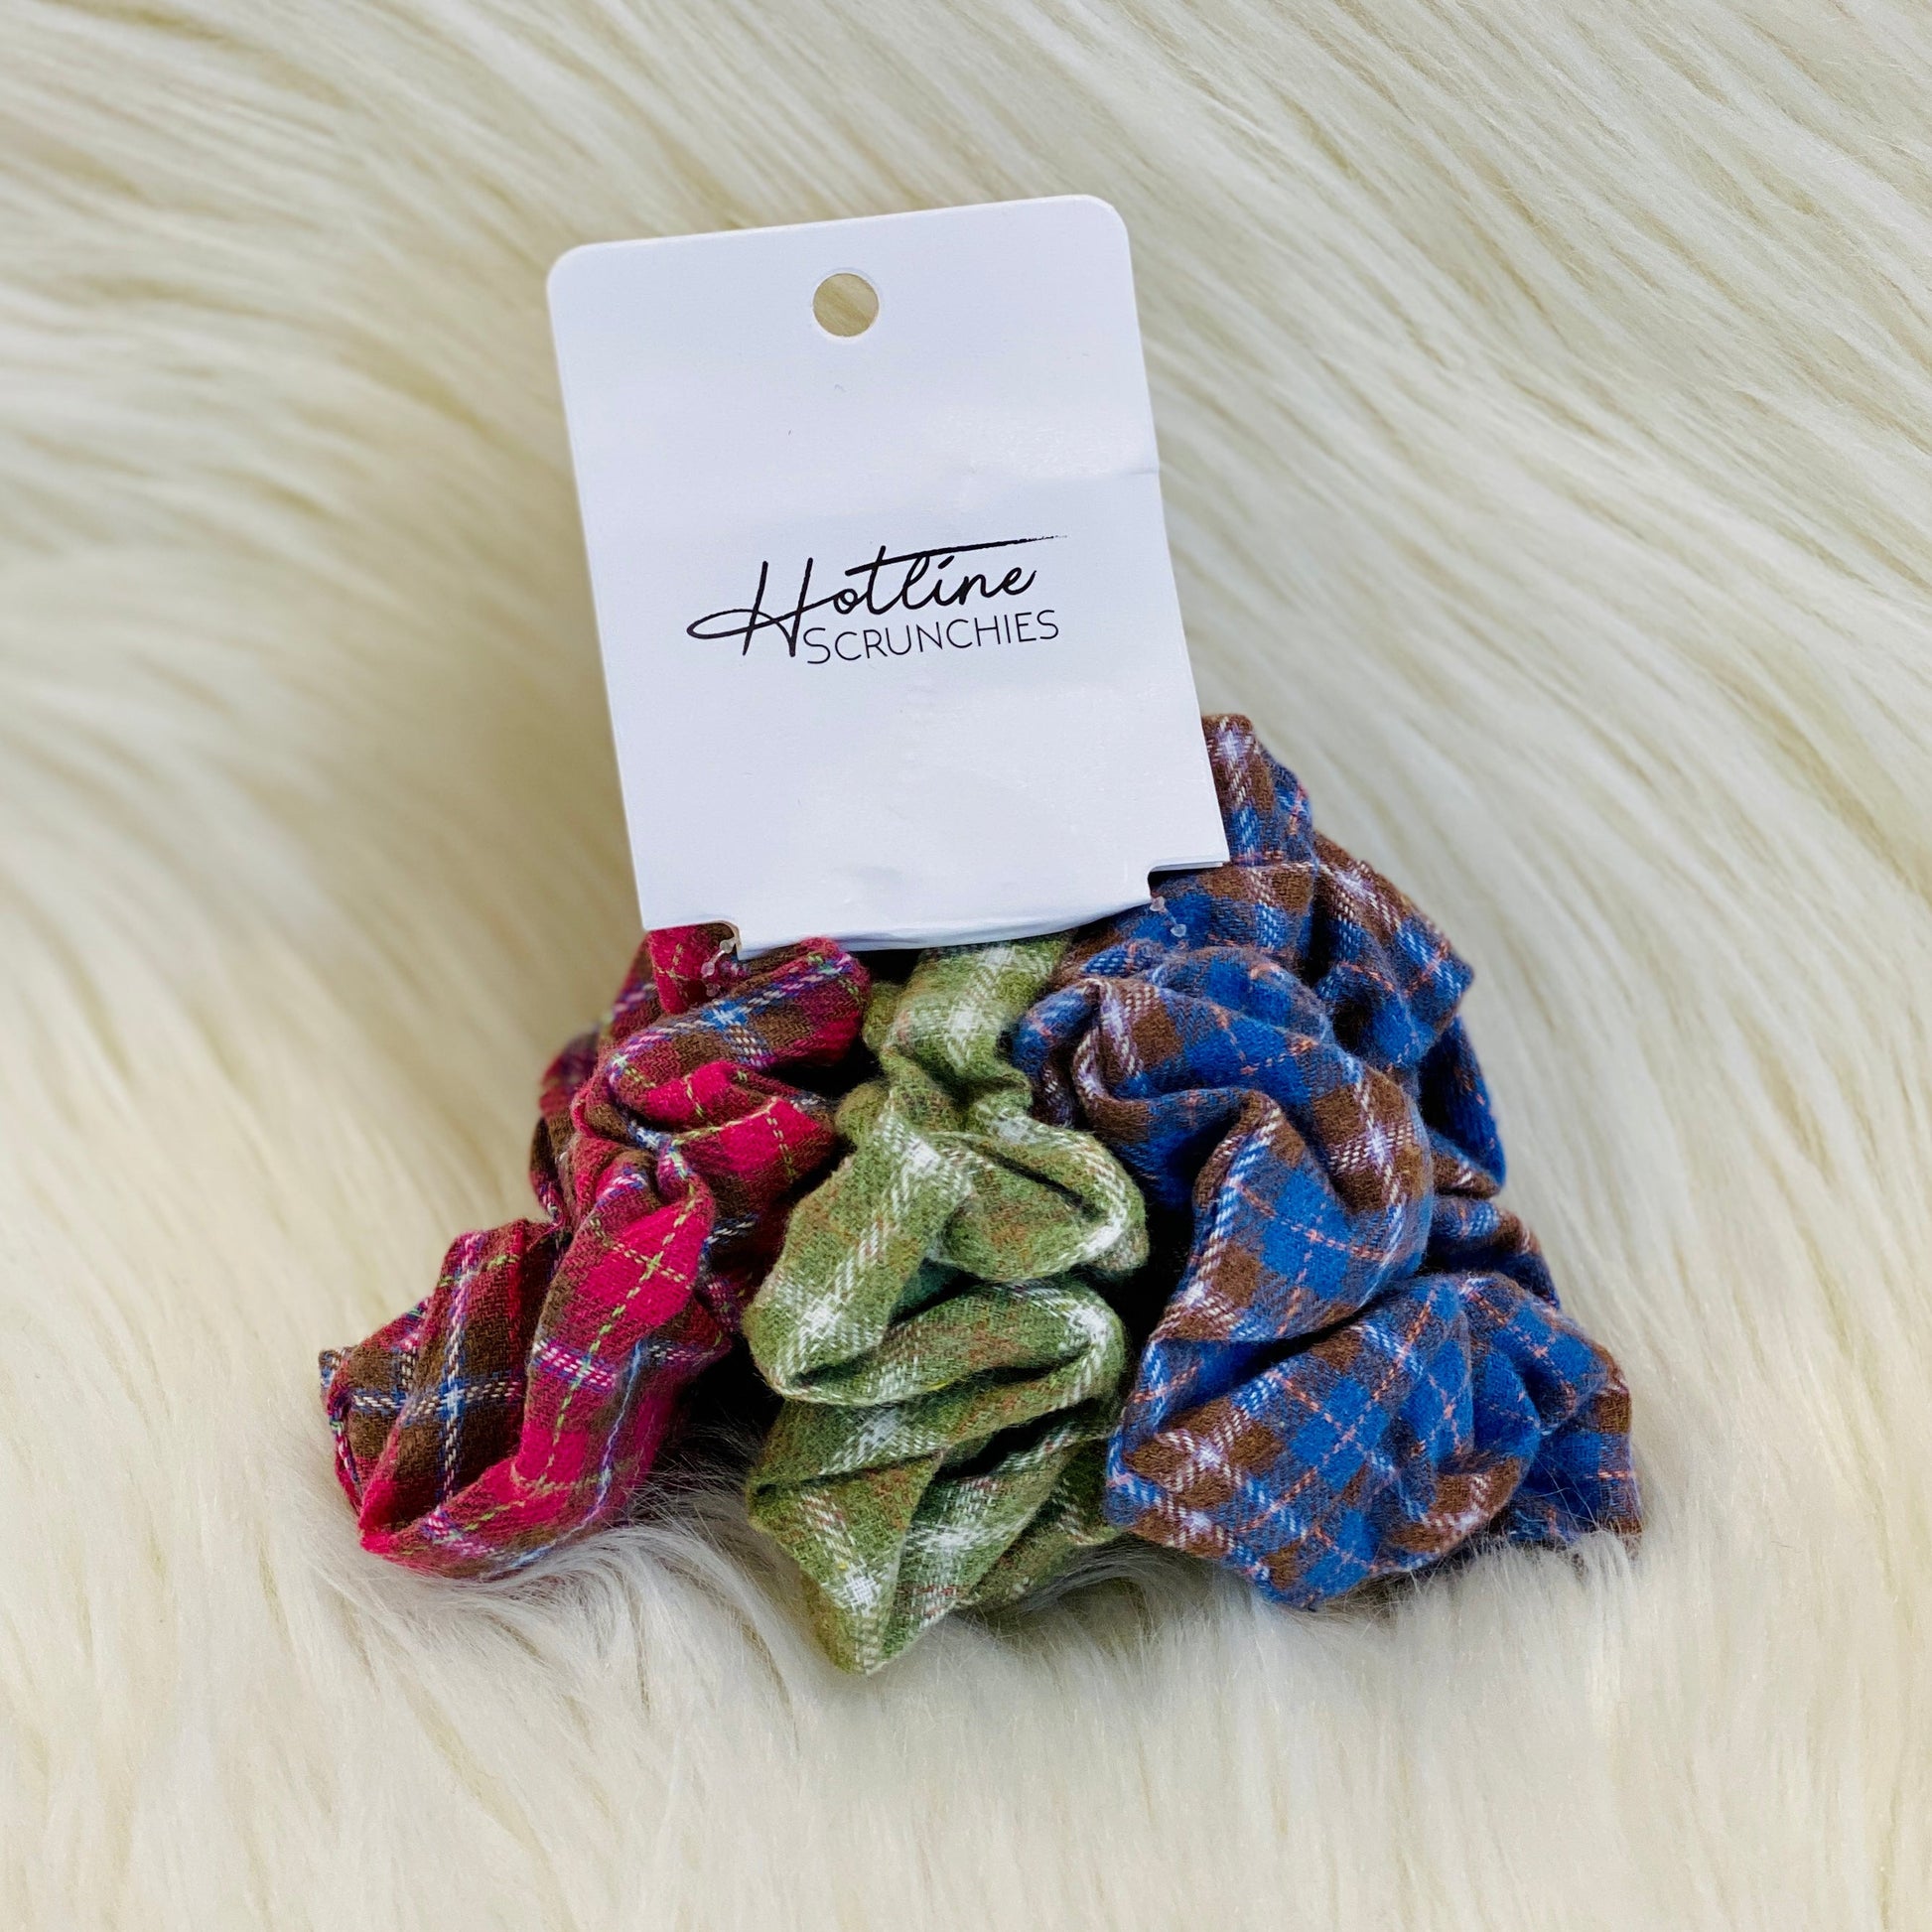 Our Fall Flannel Scrunchie Set has three scrunchies that are different color flannel prints. Perfect to match with your favorite outfit for fall! Also available in our Varsity Flannel Scrunchie Set which has good school spirit flannel print tones.